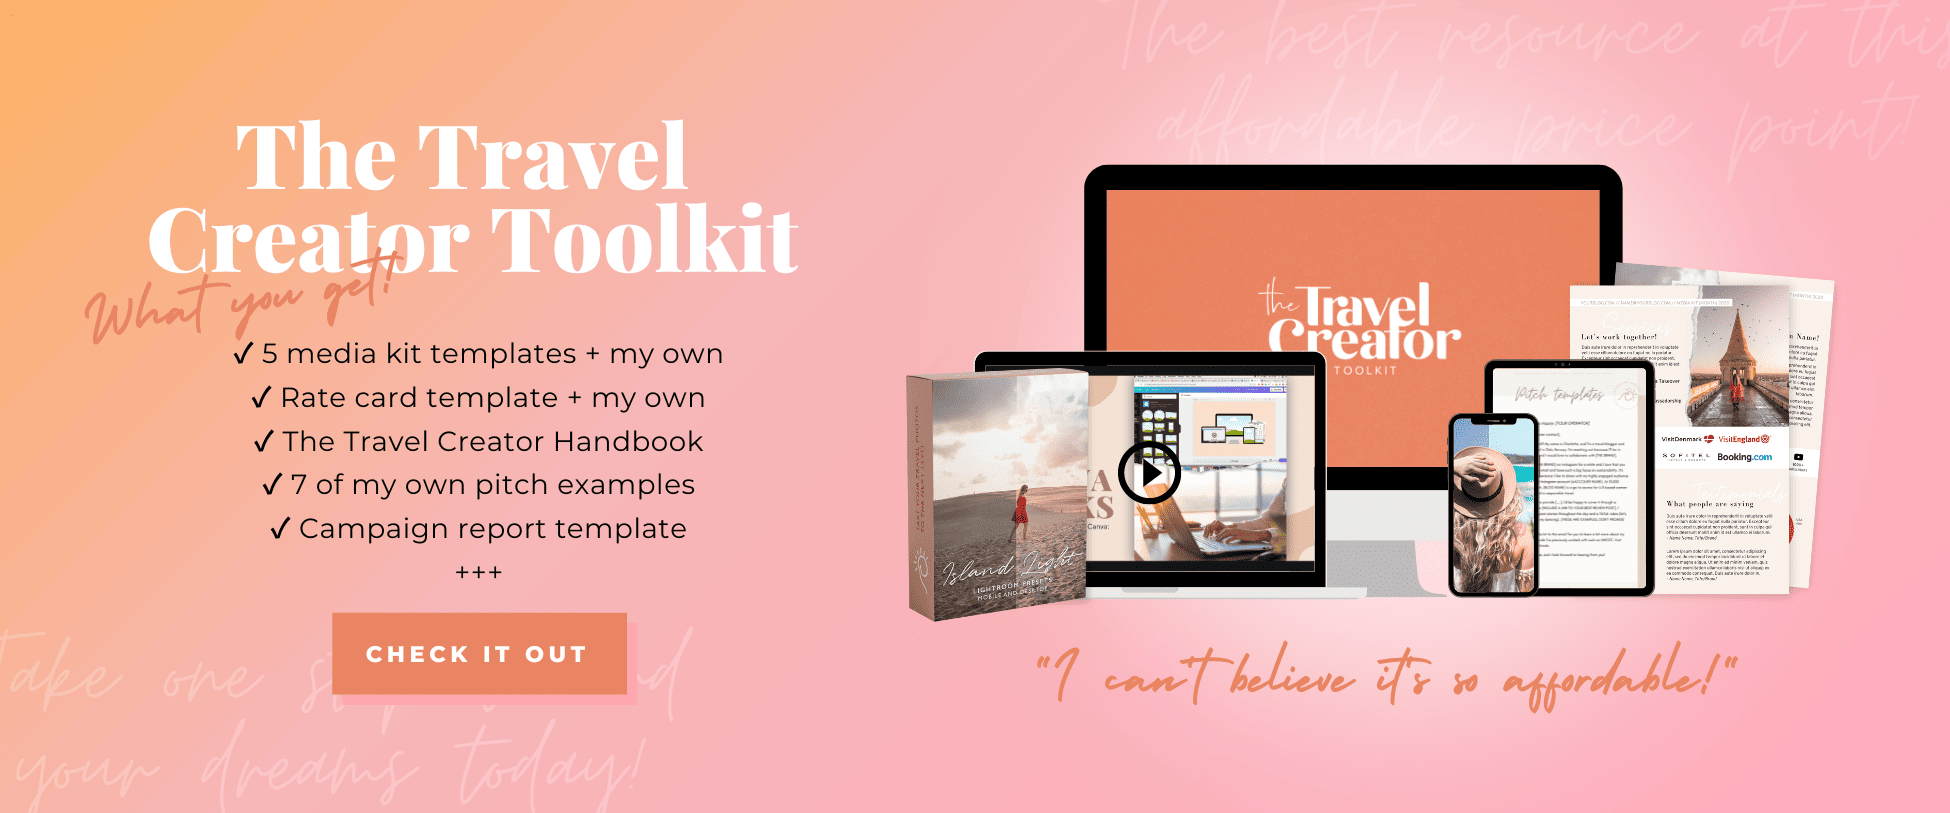 Get my media kit and case study templates, pricing guide, proposal template. Learn how to become a travel content creator.